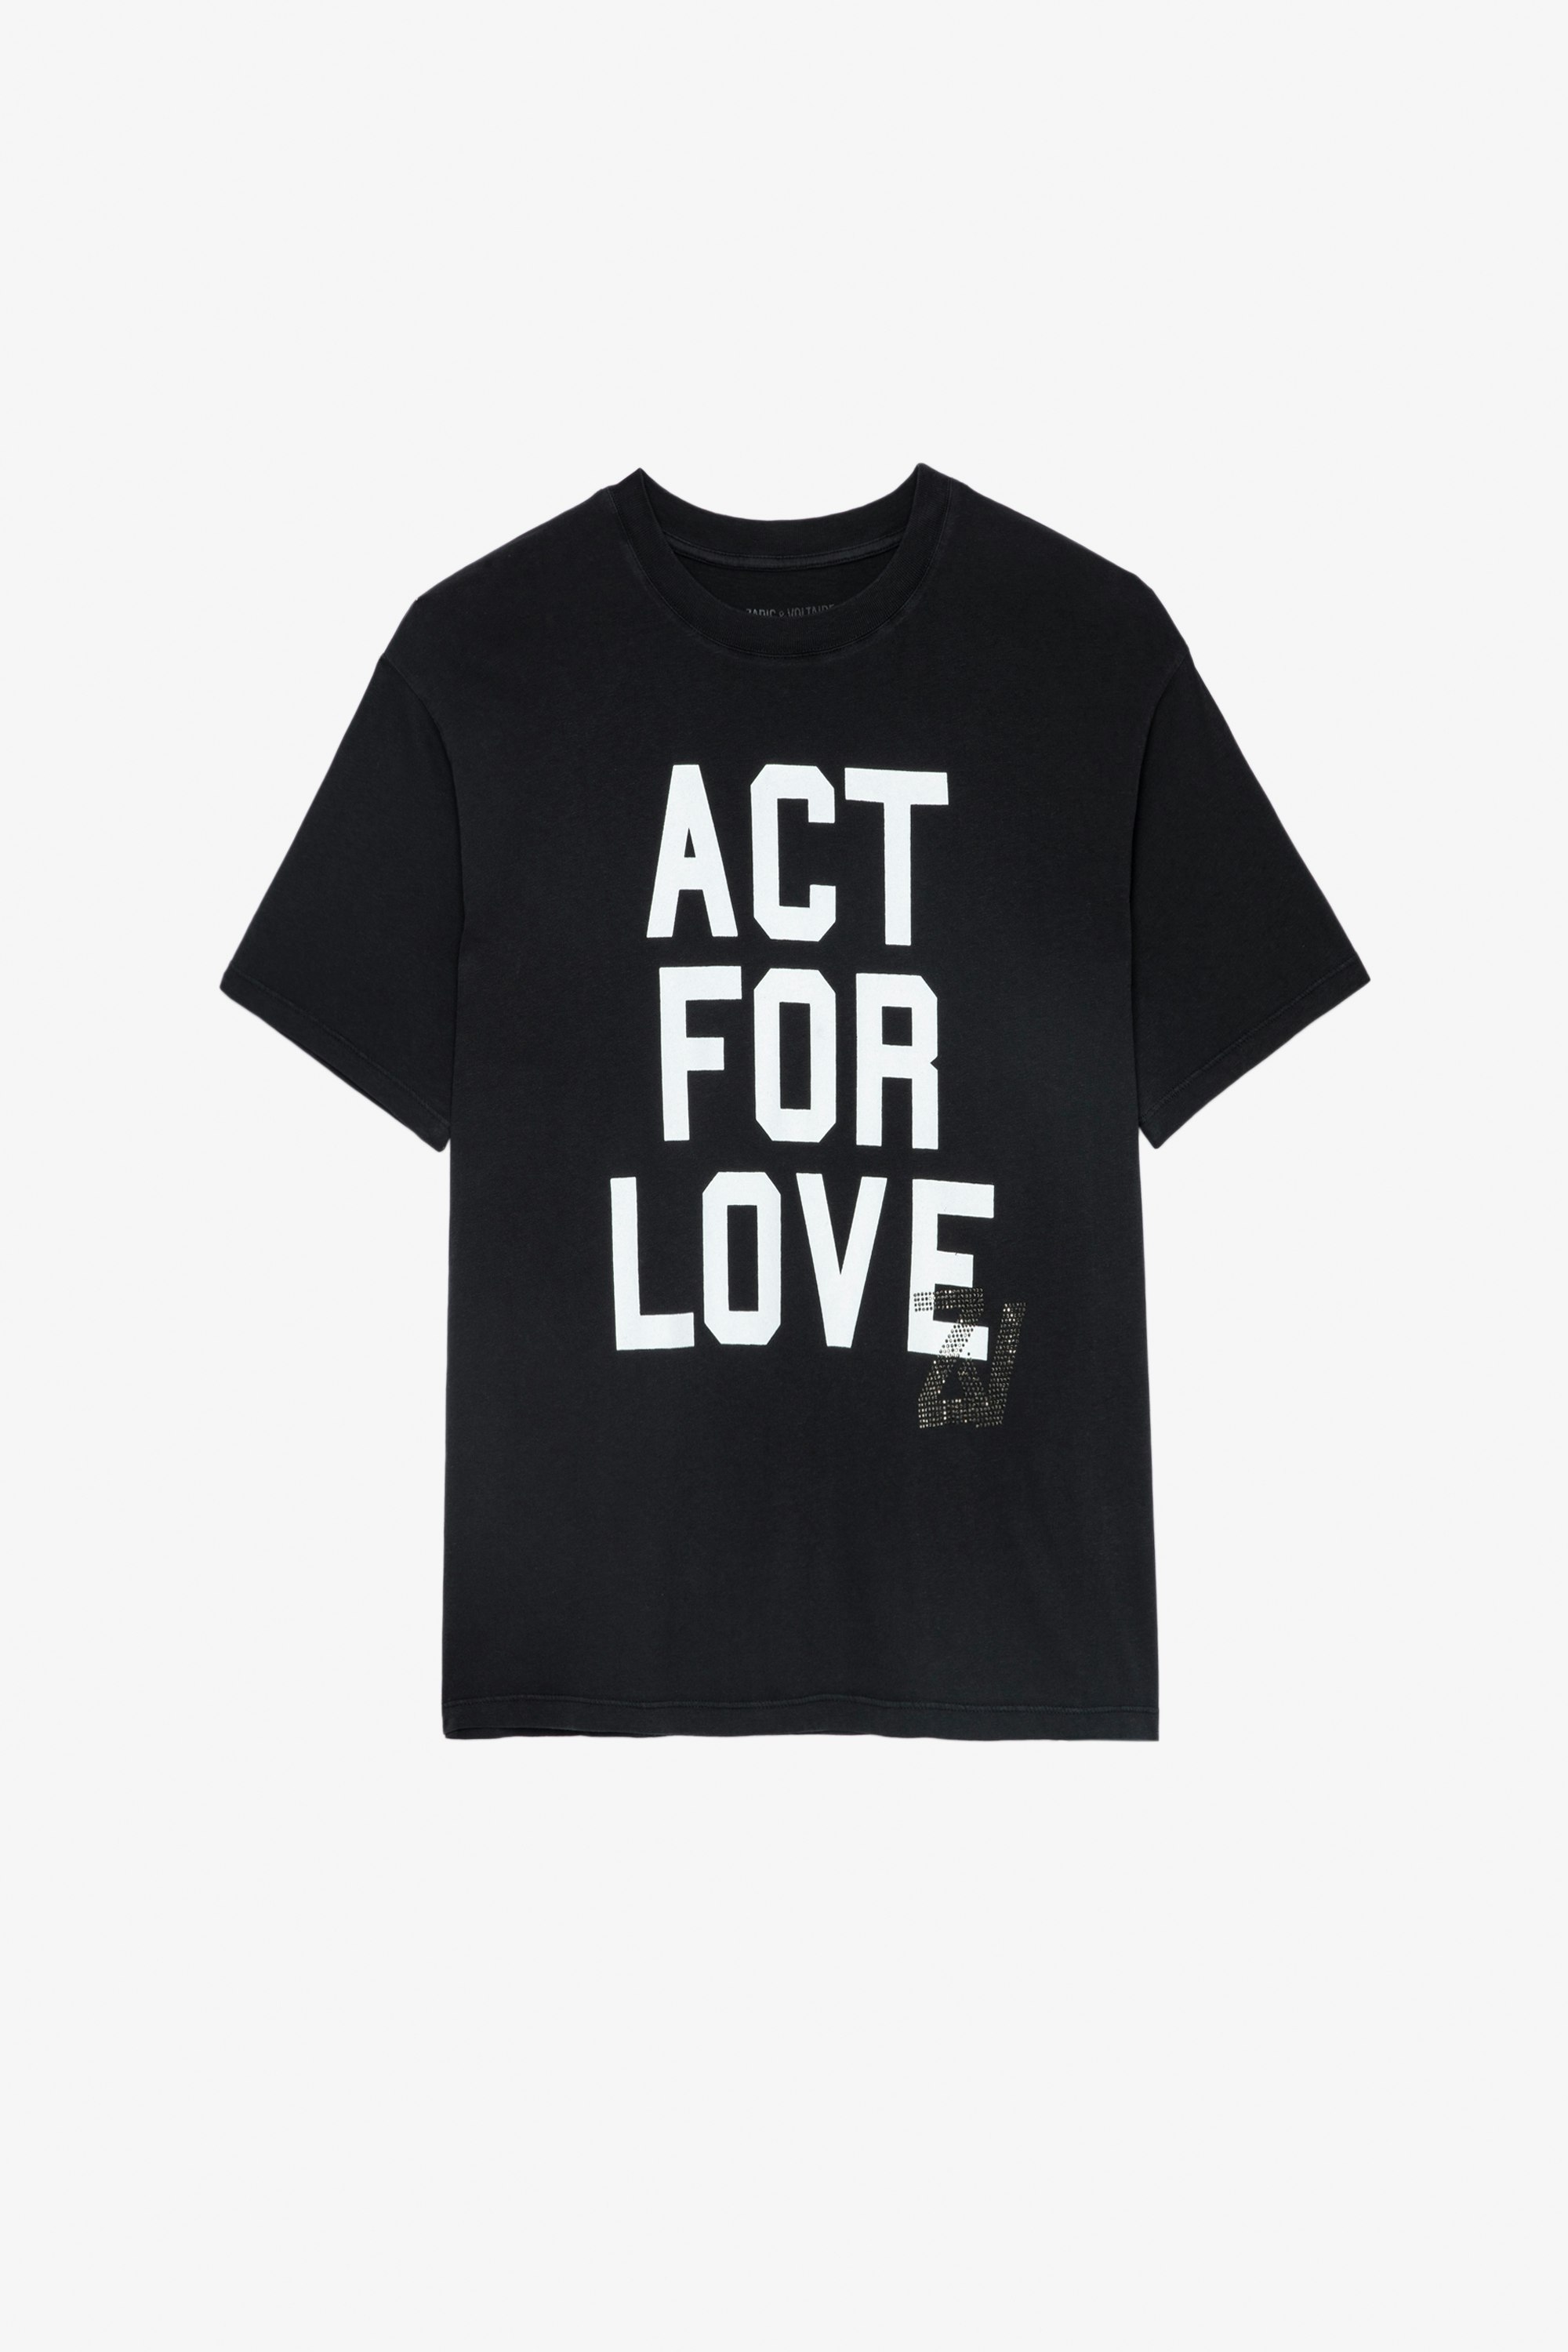 Brooxs T-shirt Women's black cotton round-neck T-shirt with short sleeves and “Act for Love” slogan